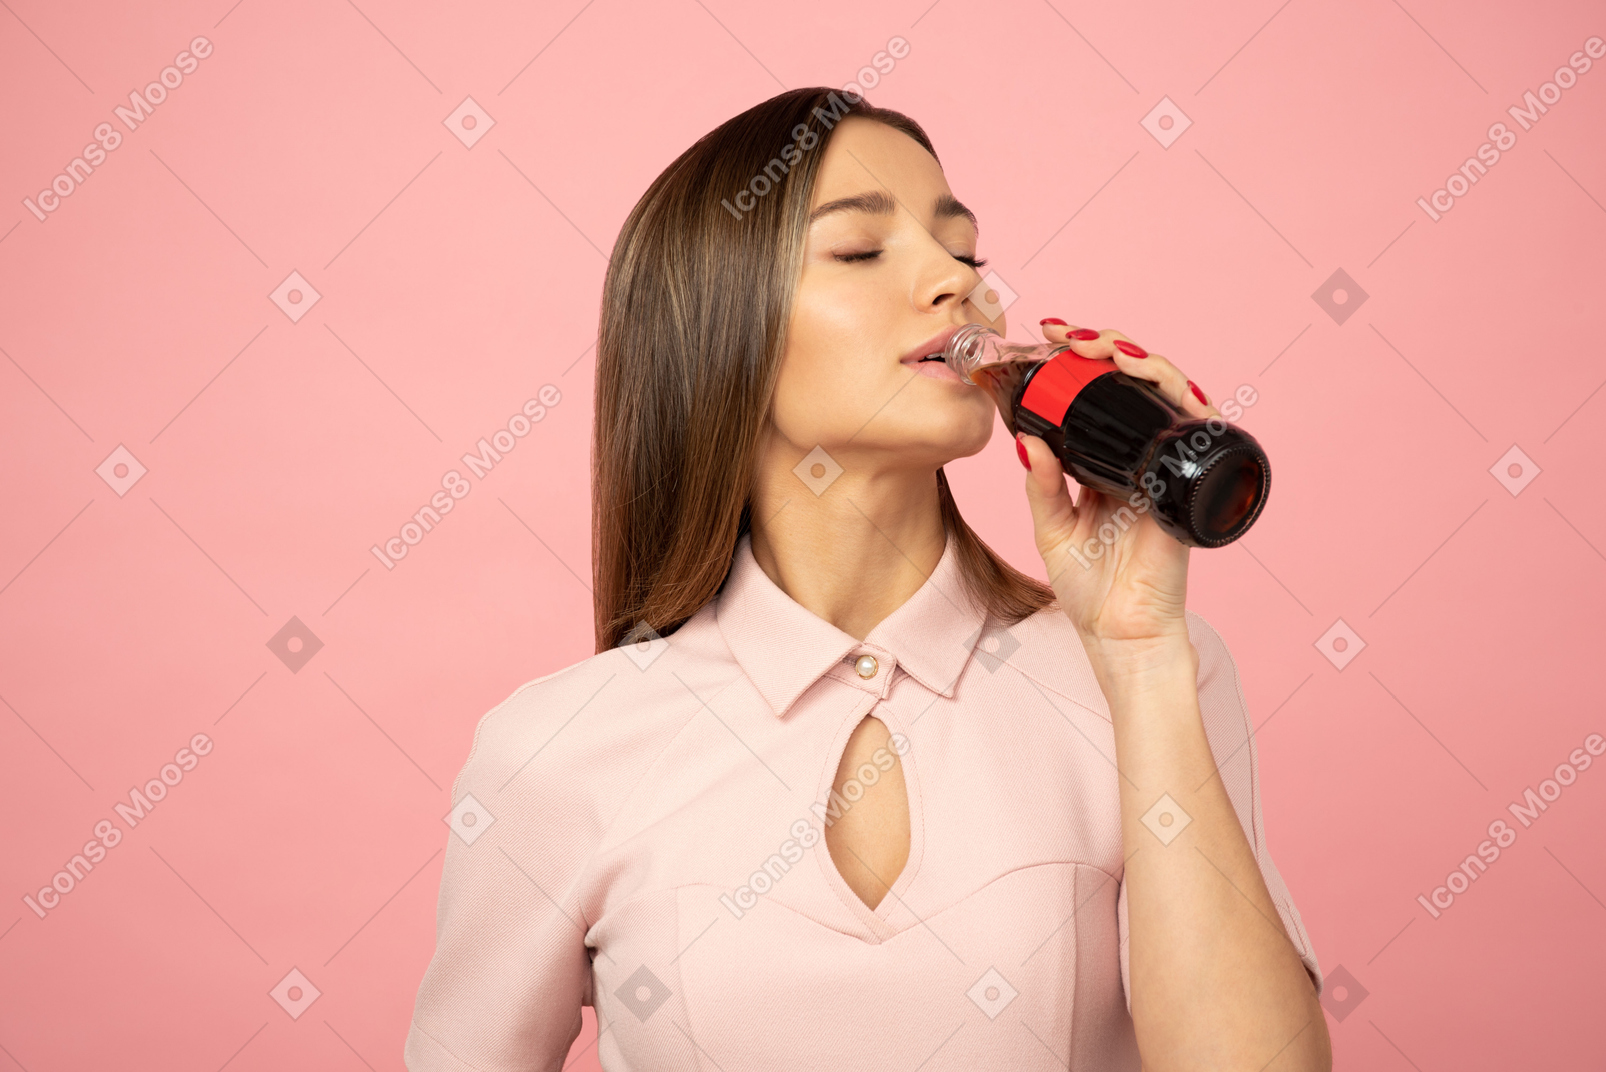 Attractive girl drinking a soda